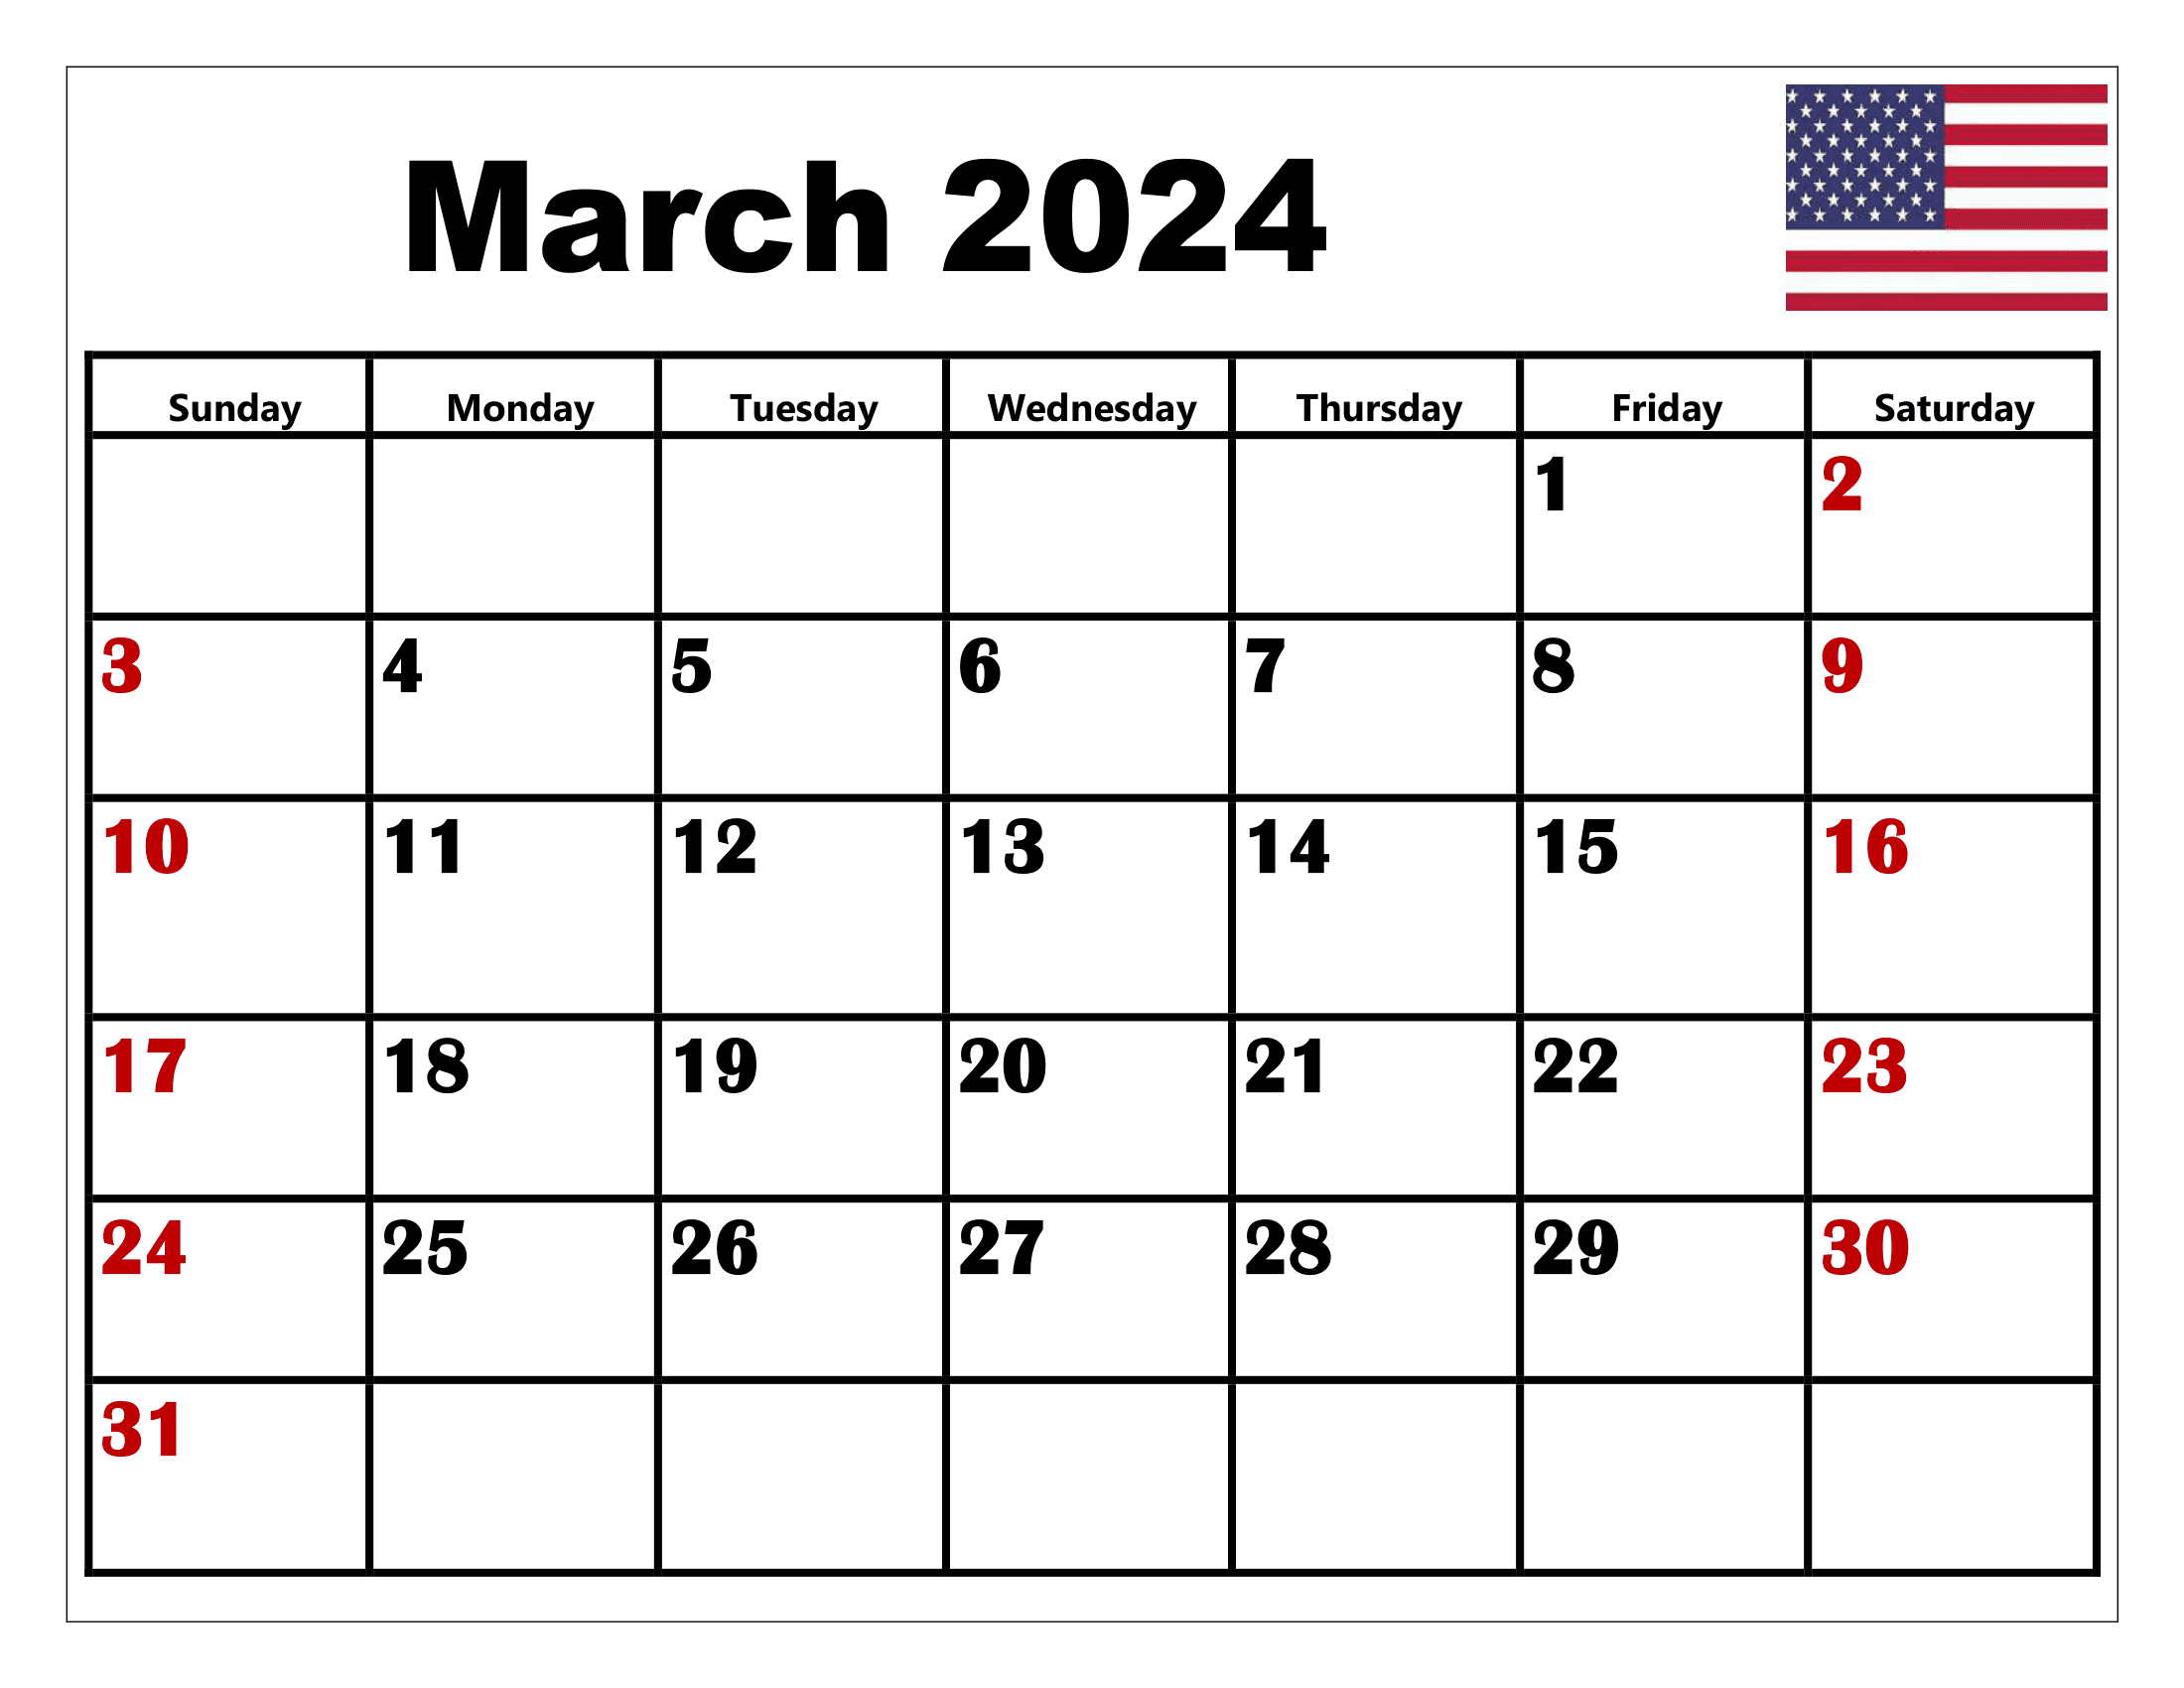 March 2024 Calendar Printable Pdf With Holidays Template Free for March 2024 Printable Calendar With Holidays